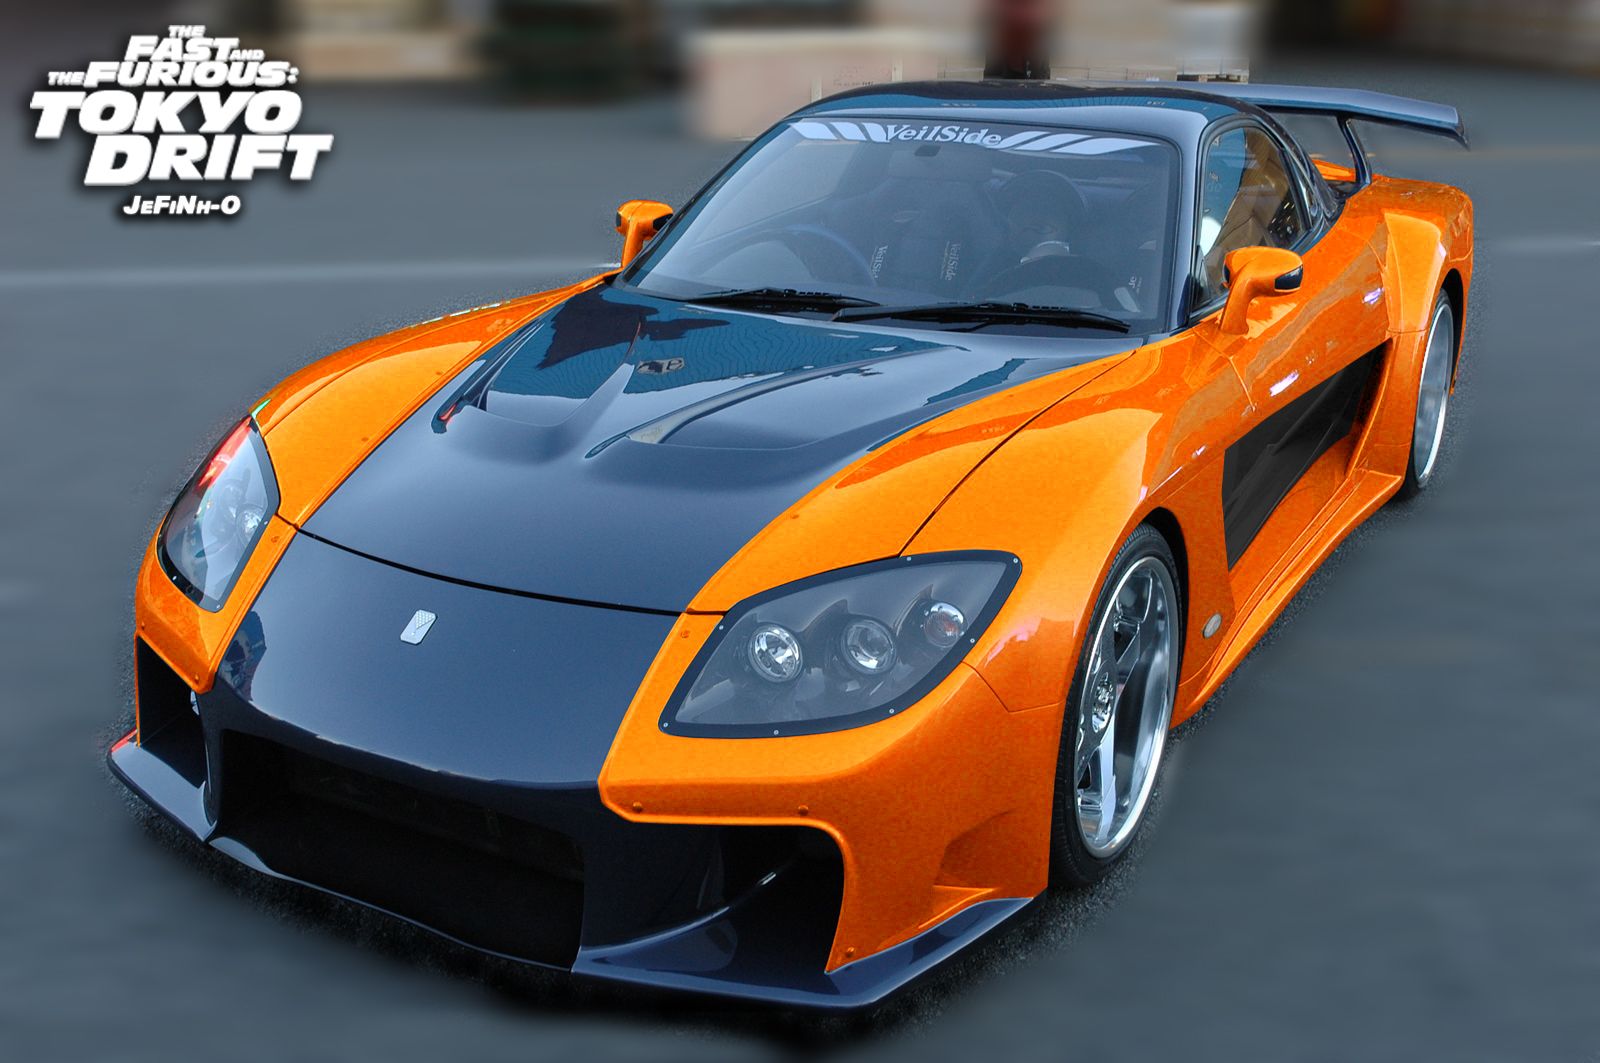 Harga Mobil Mazda Rx 7 Veilside (Fast and the Furious)